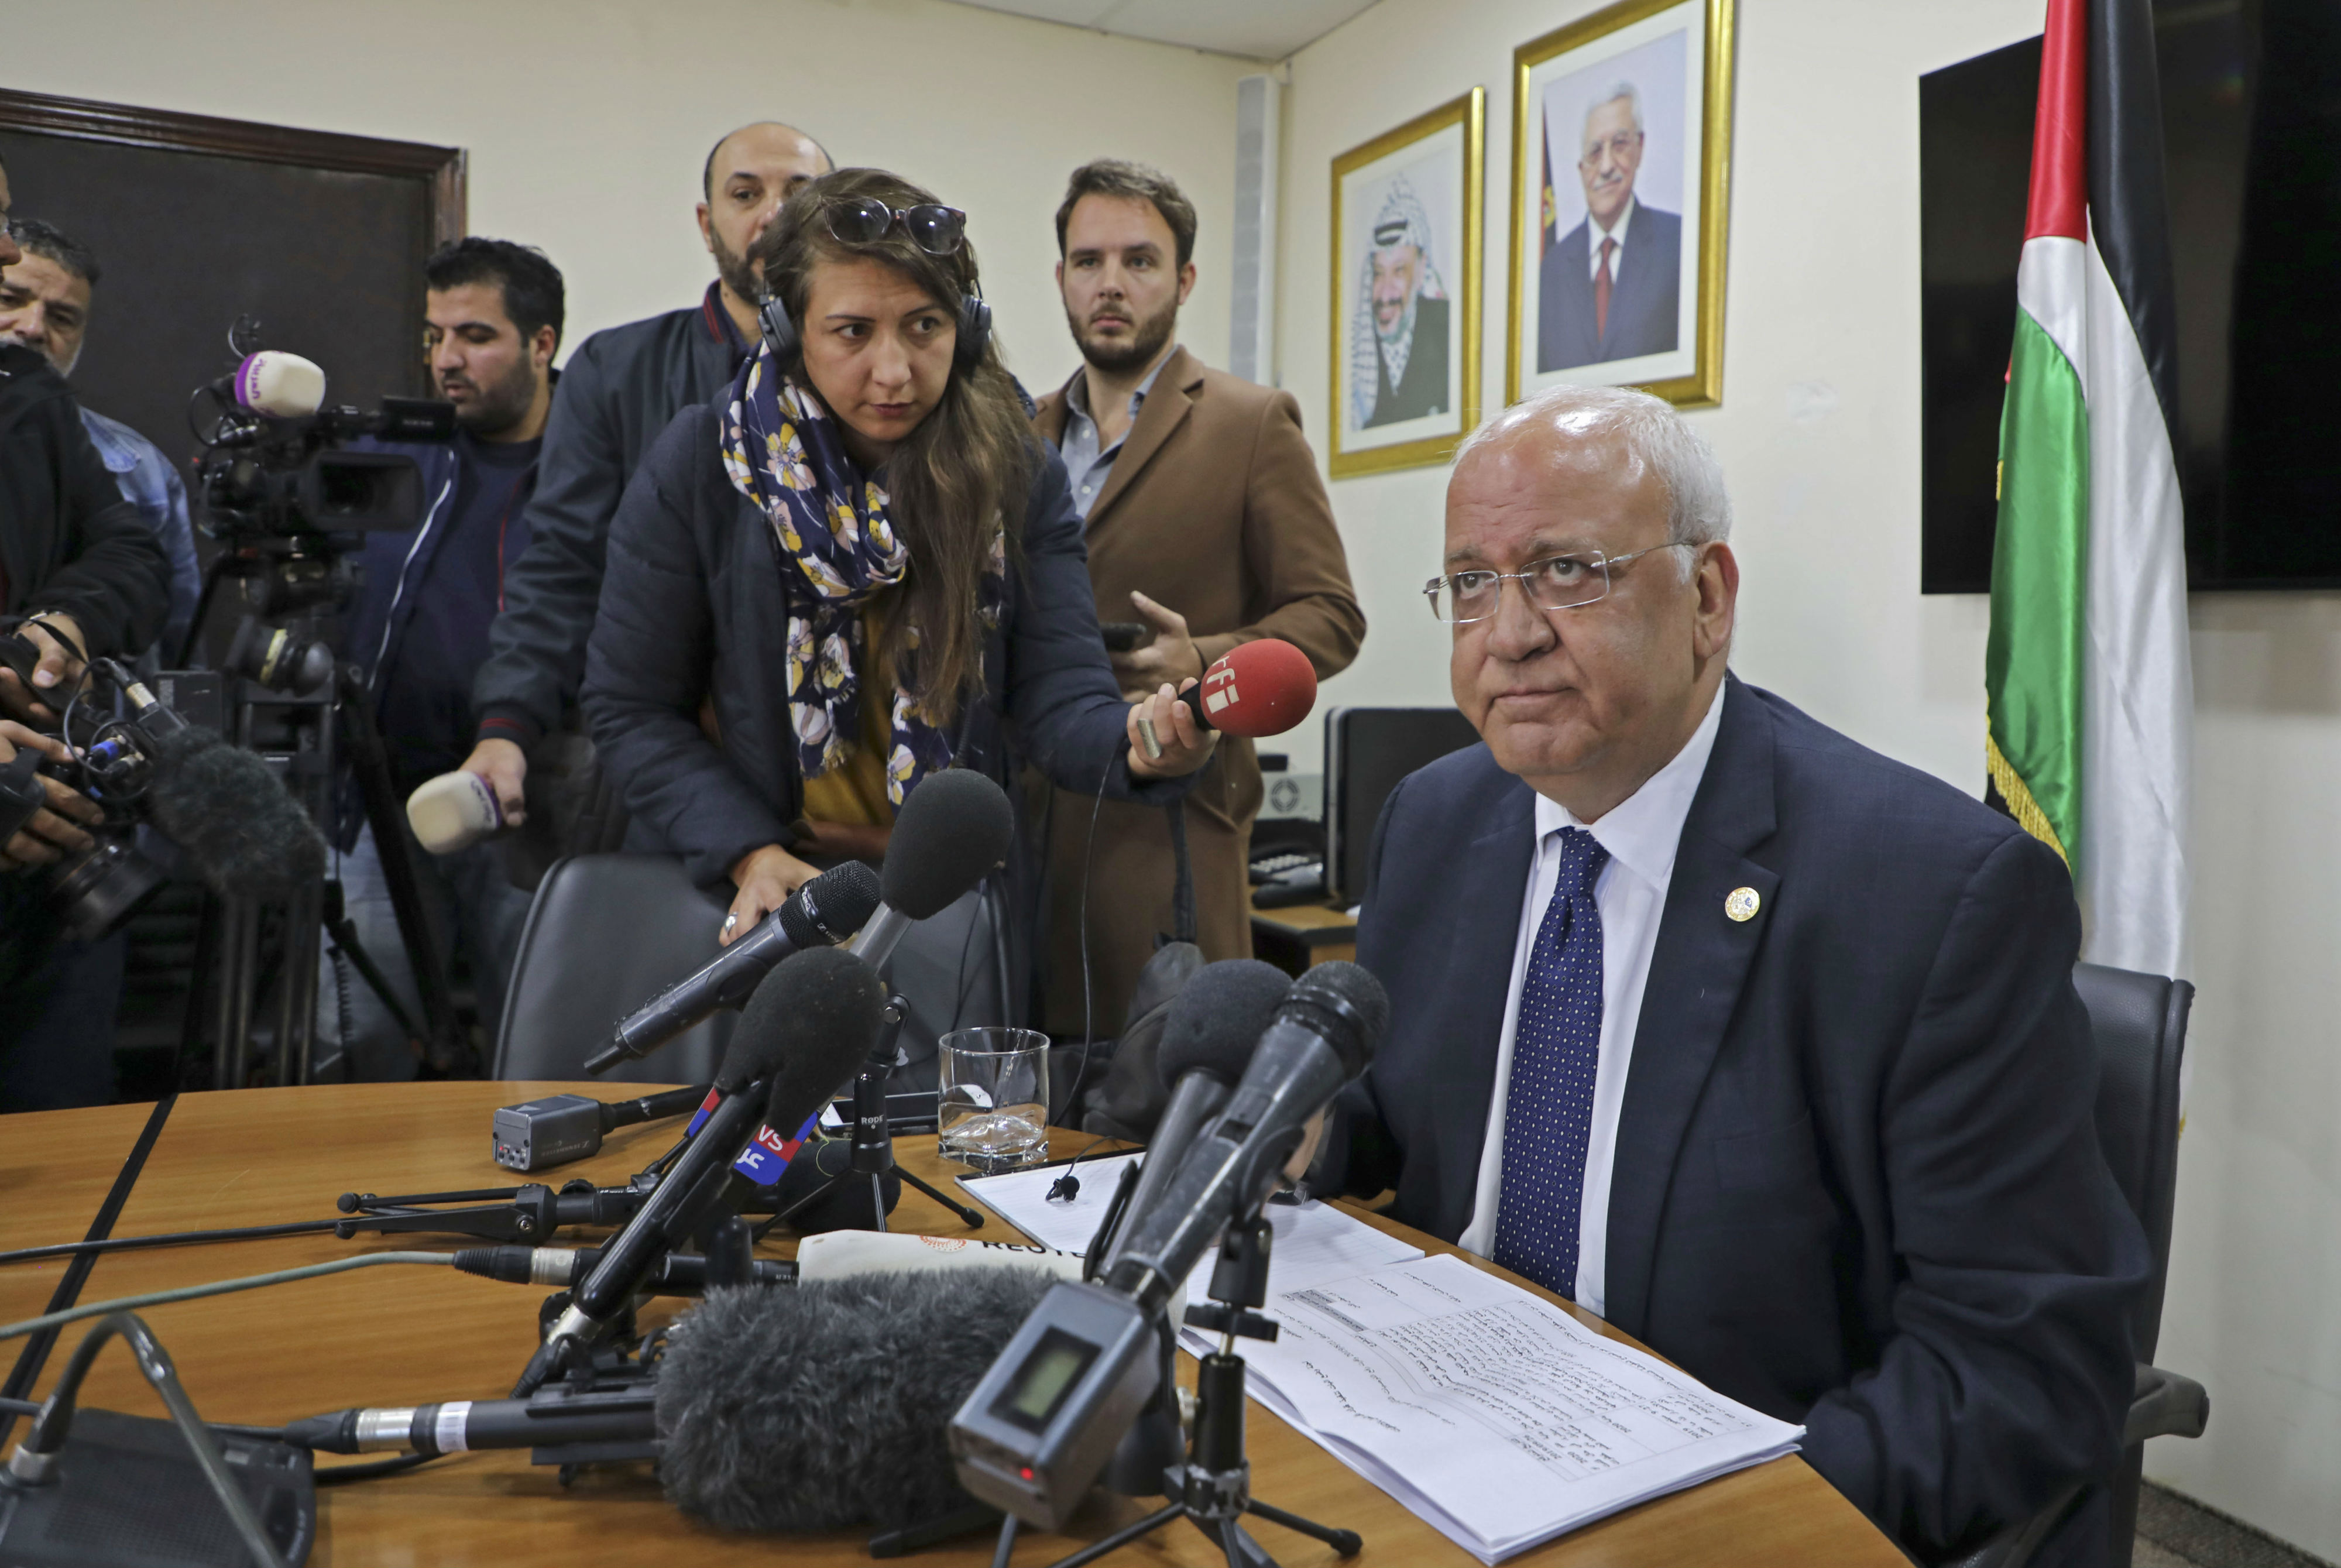 Saeb Erekat (R), Secretary General of the Palestine Liberation Organization (PLO) and chief Palestinian negotiator, speaks during a press conference in the Palestinian West Bank city of Ramallah (AFP)